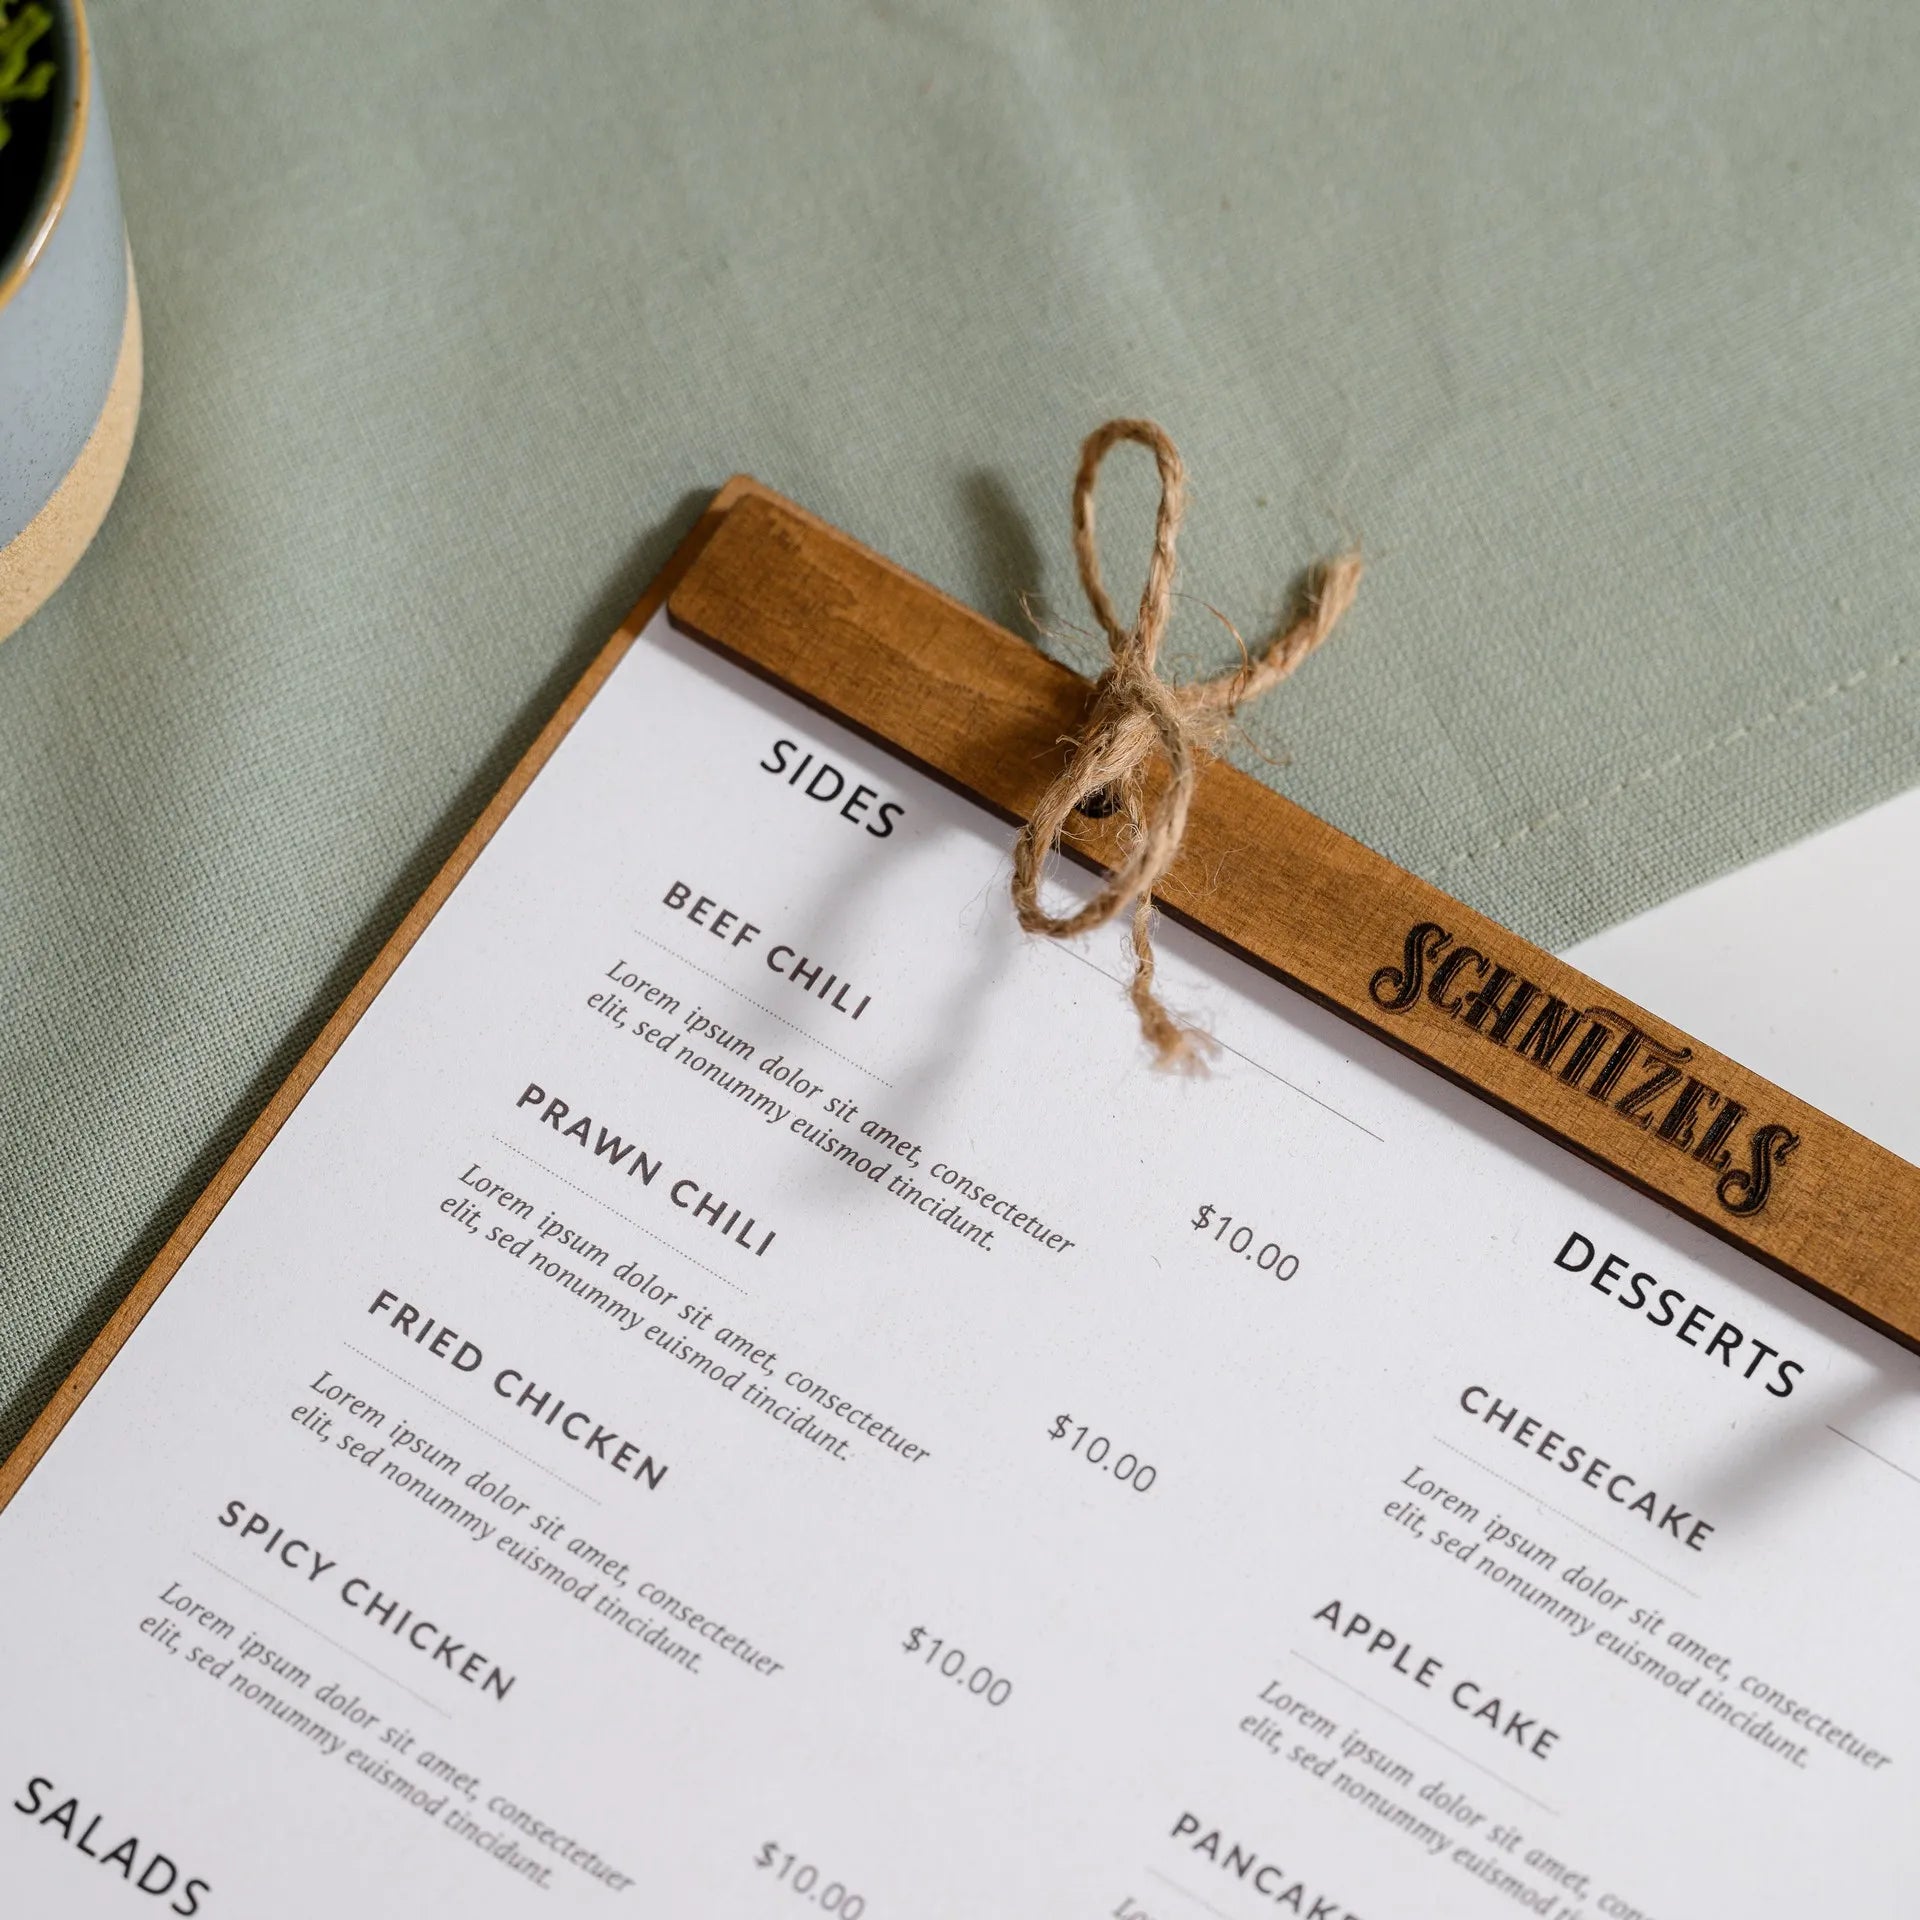 Personalized Menu Cards Holder: Reflect your cafe's identity with custom details.